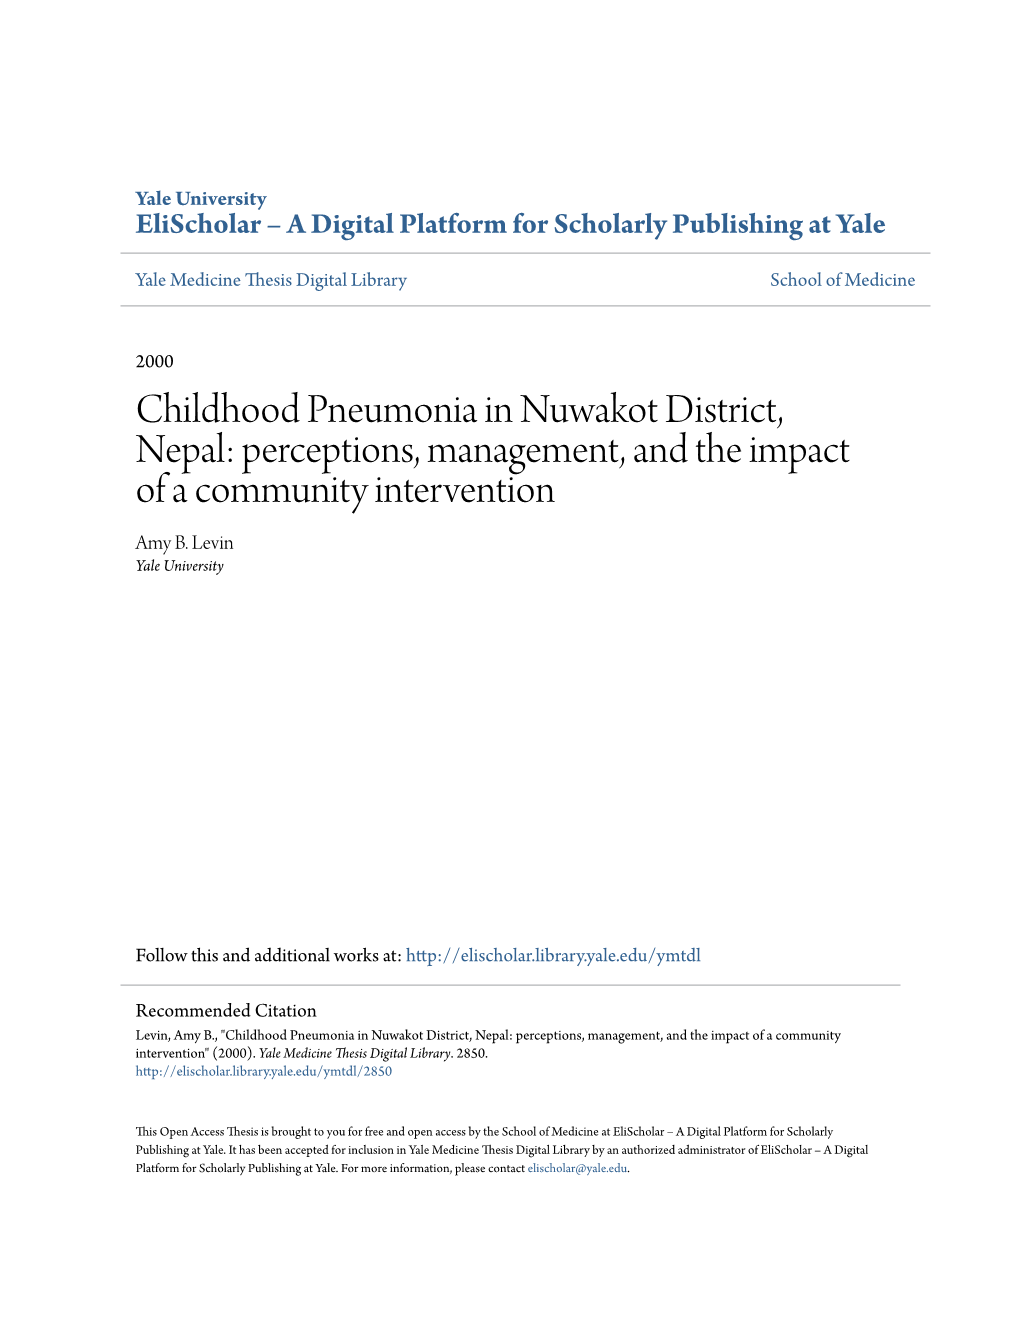 Childhood Pneumonia in Nuwakot District, Nepal: Perceptions, Management, and the Impact of a Community Intervention Amy B